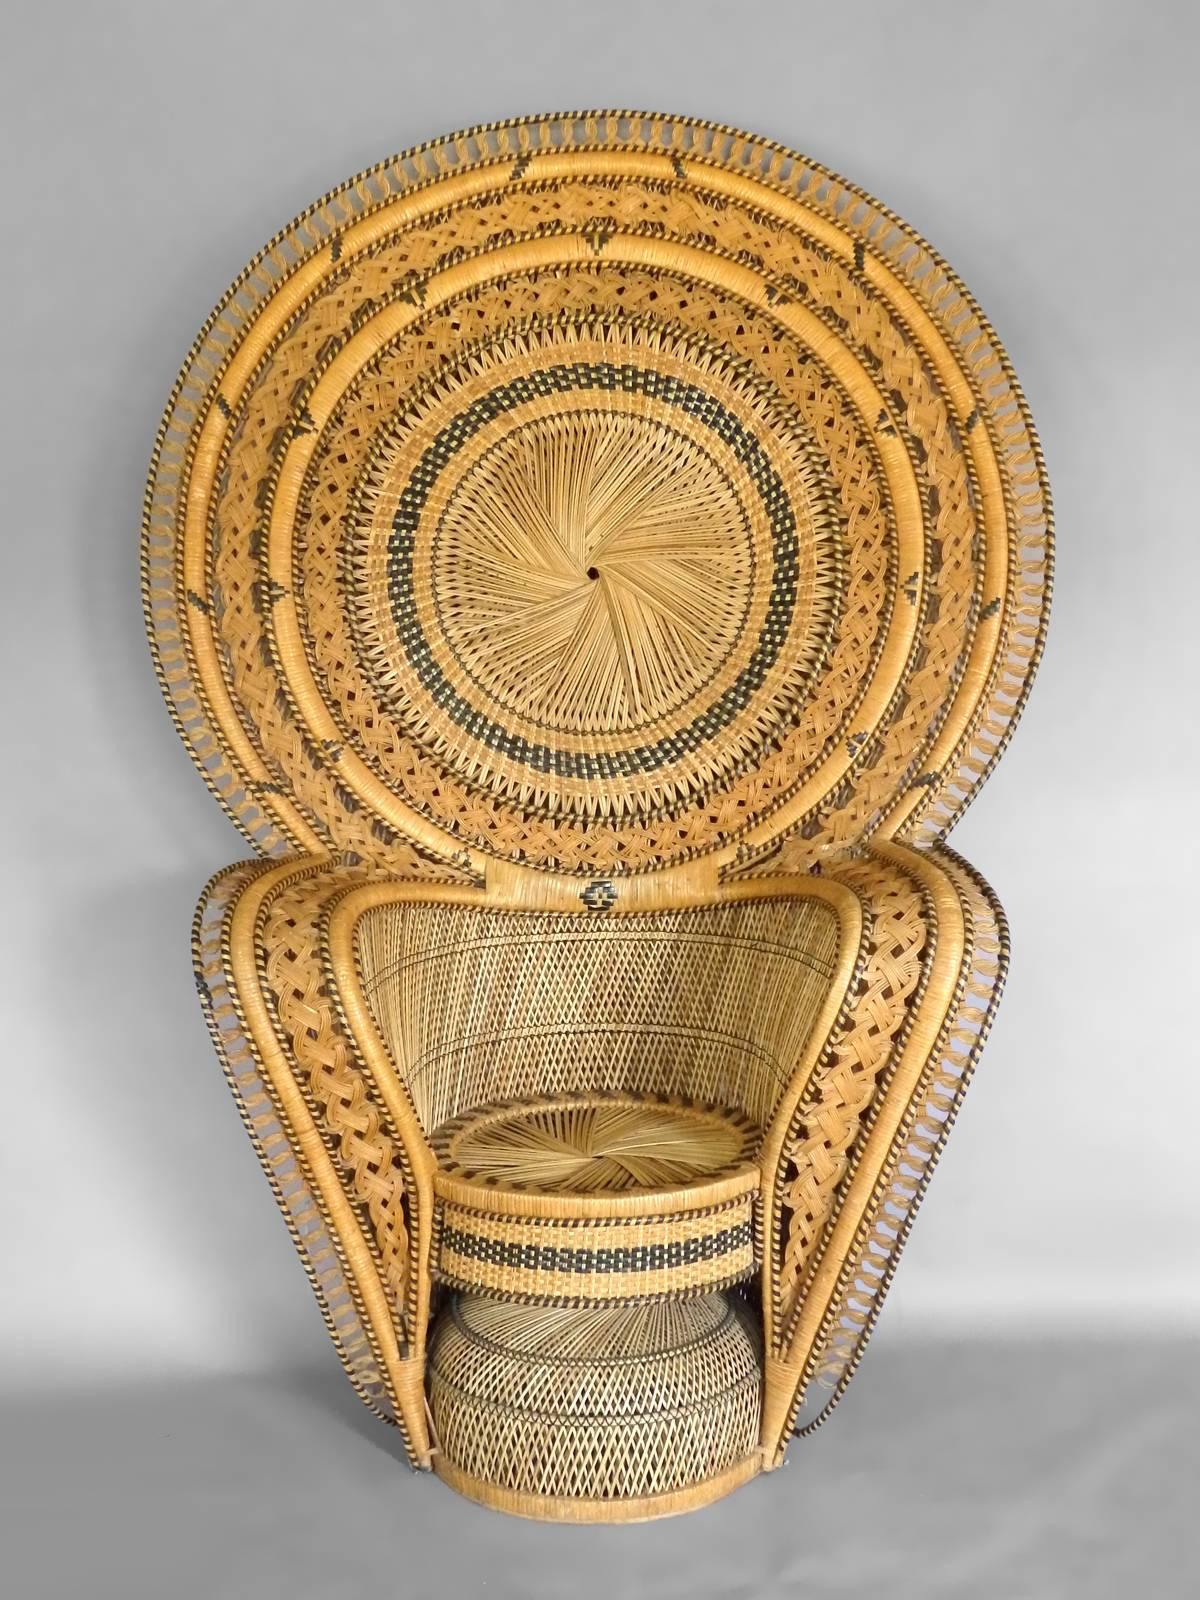 Large and impressive woven rattan peacock chair with ottoman.
Ottoman: 19 diameter x 15 tall.